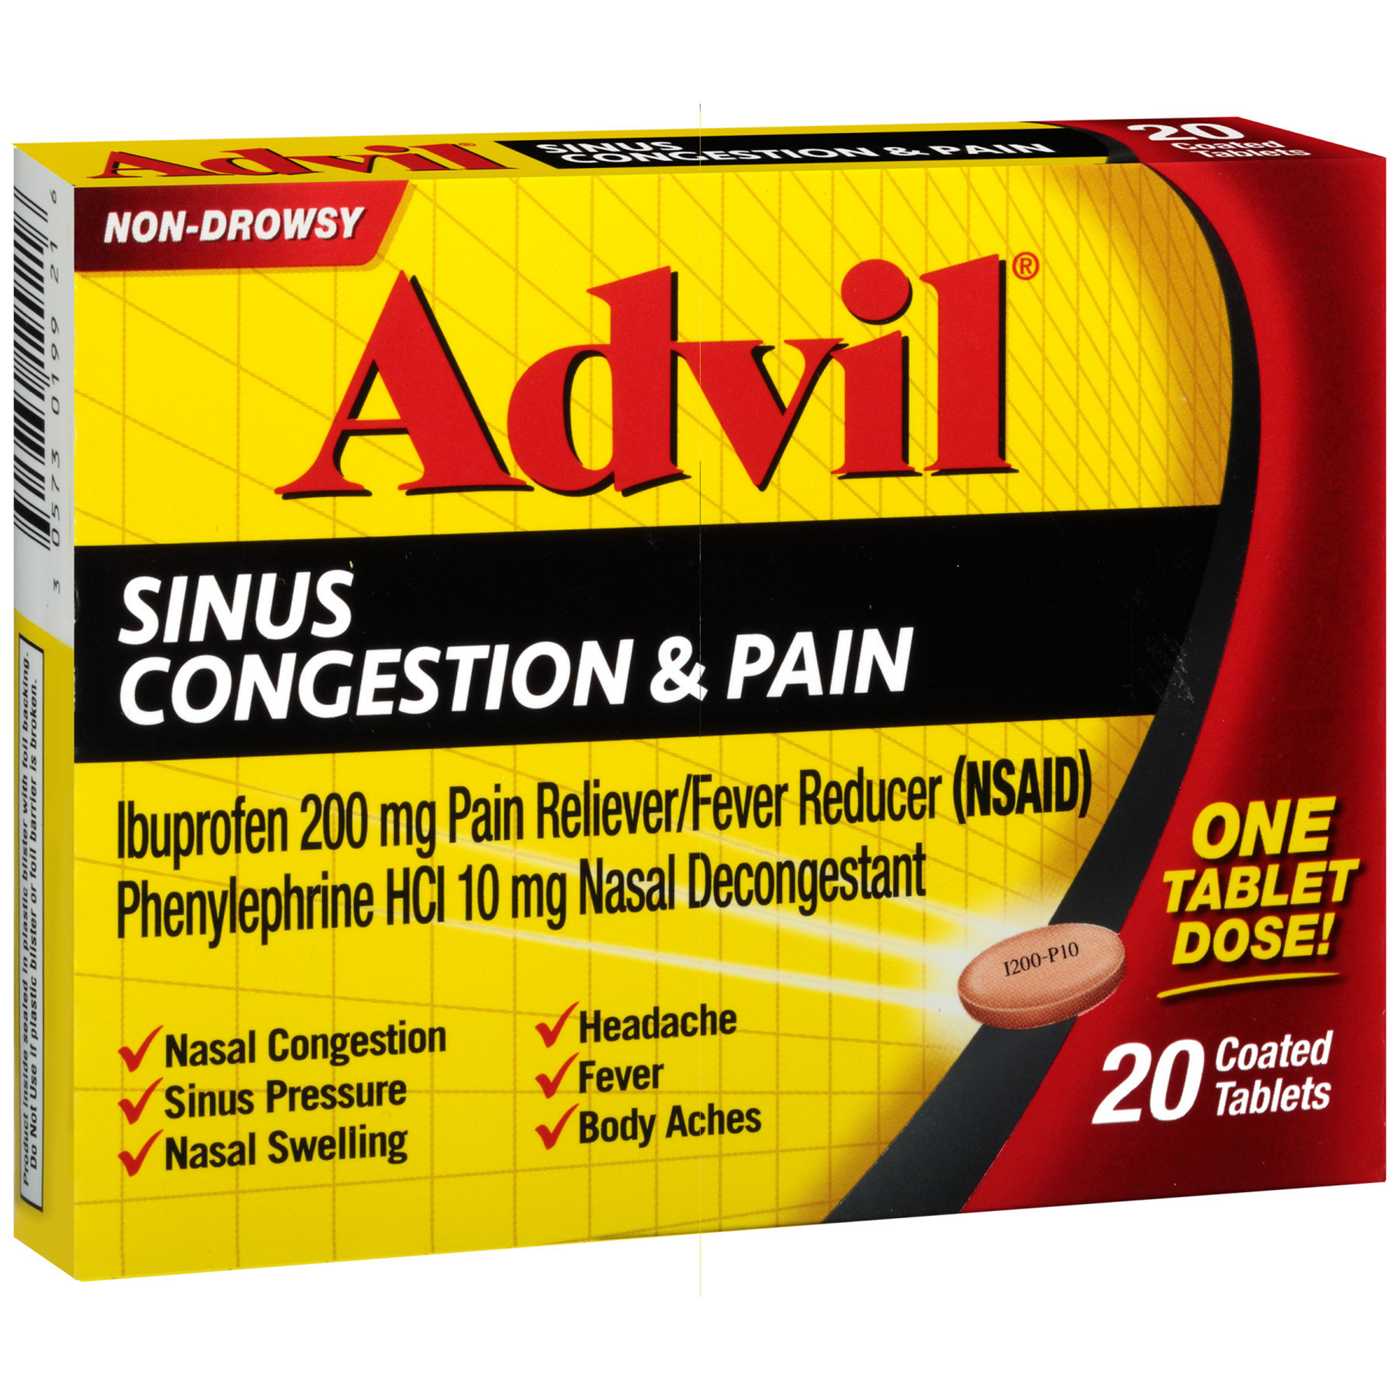 Advil Sinus Congestion and Pain Relief; image 1 of 8